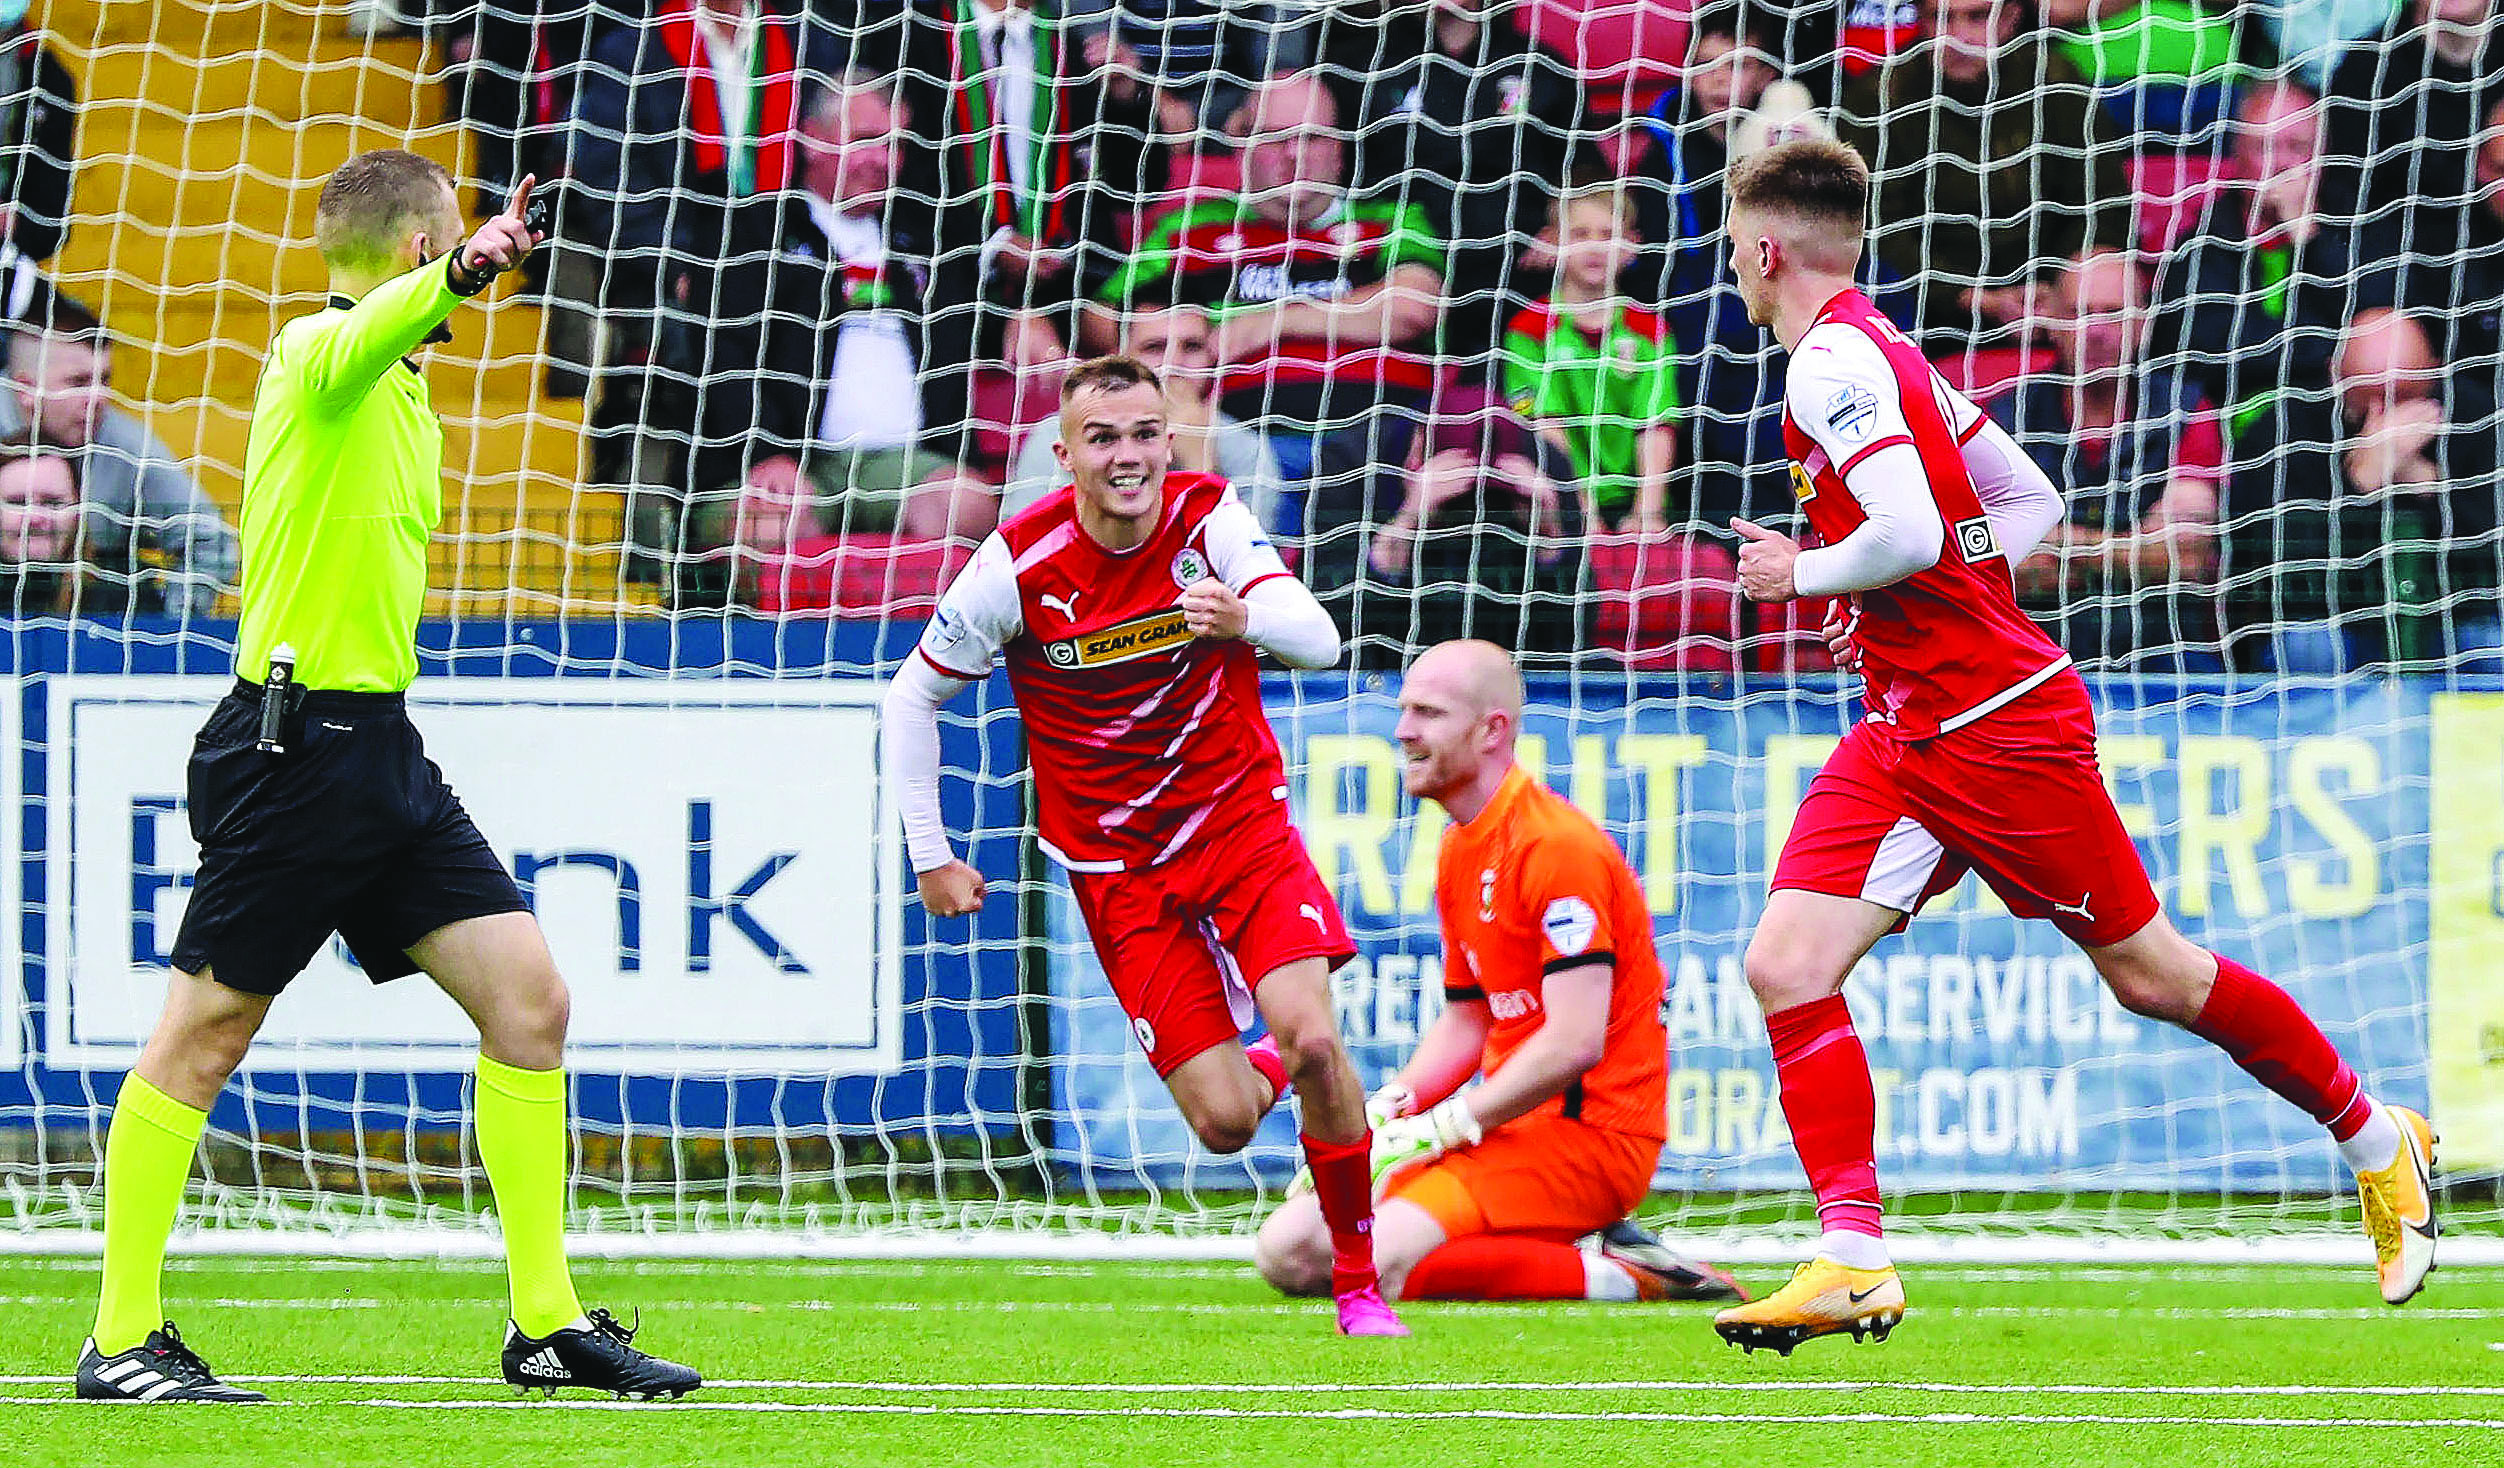 Ryan Curran celebrates scoring the only goal of the game when Cliftonville beat Glentoran back in September